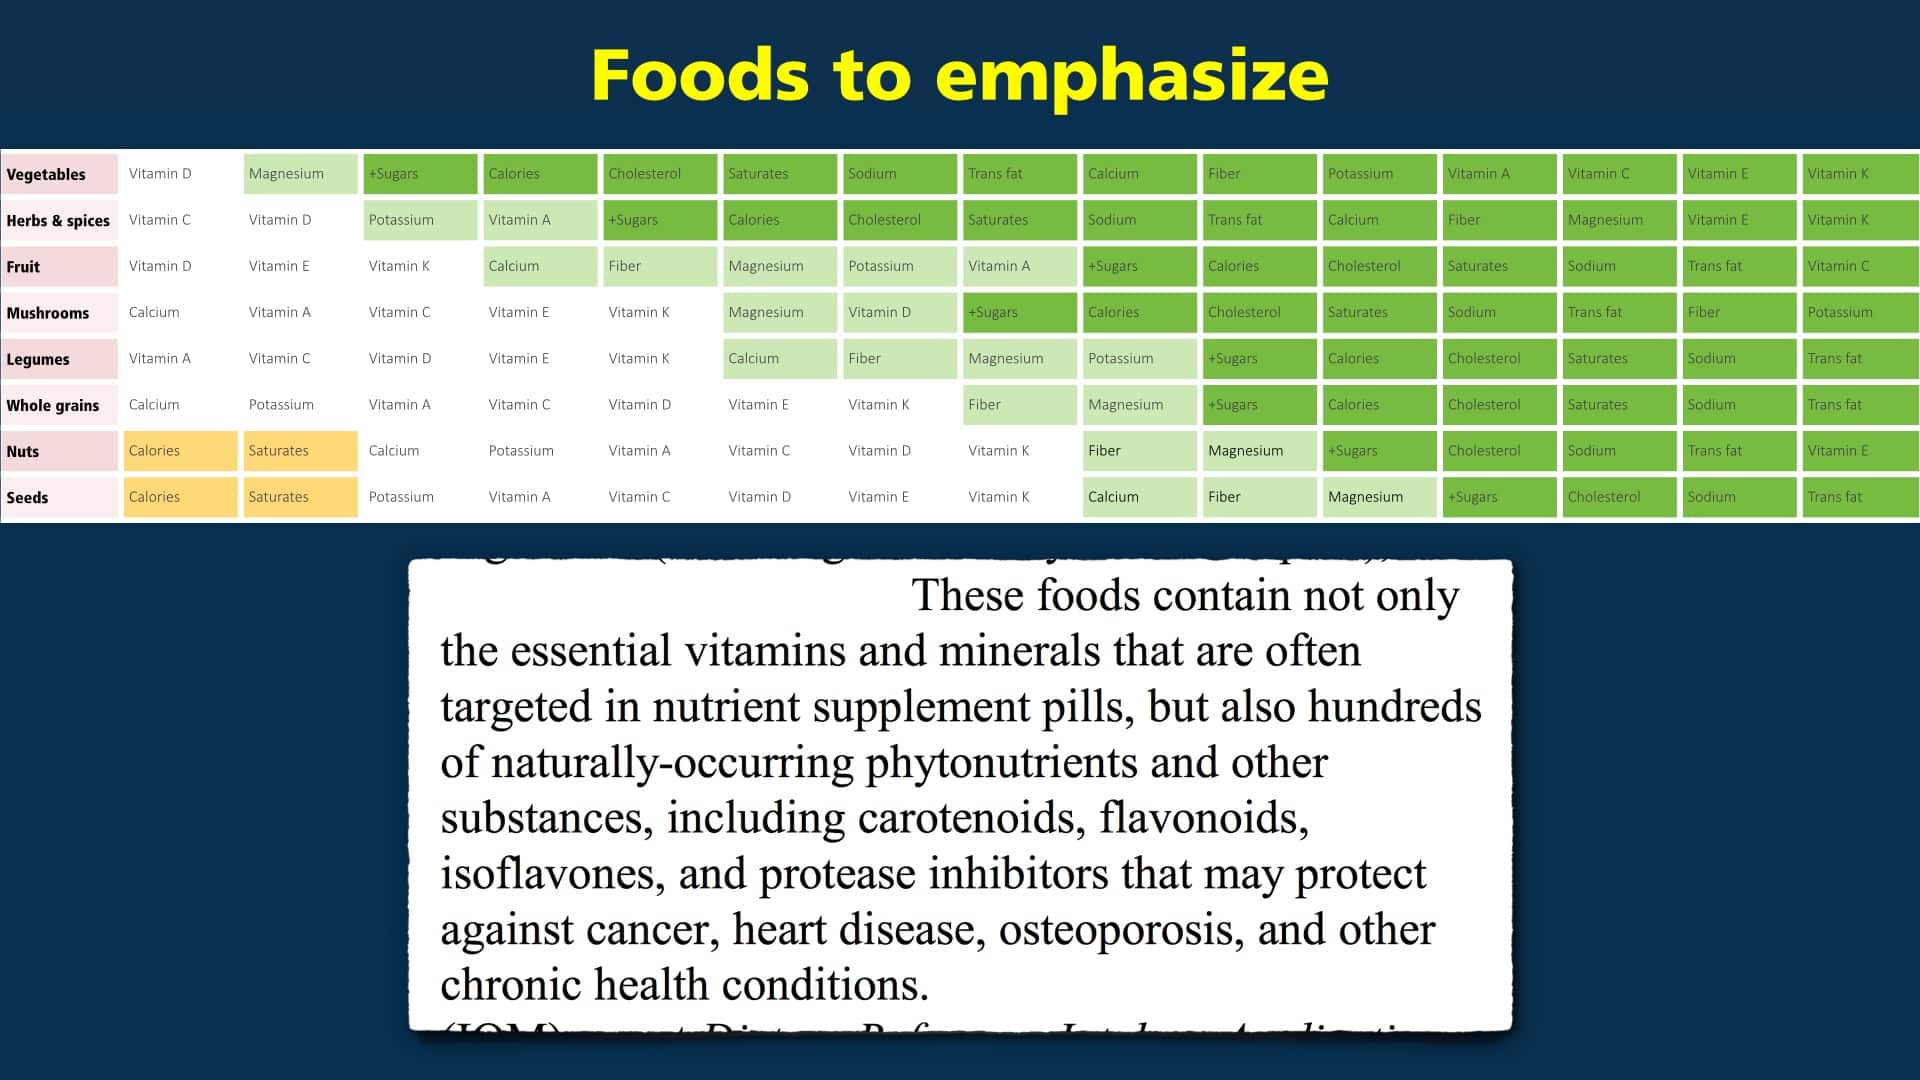 What are the Healthiest Foods?